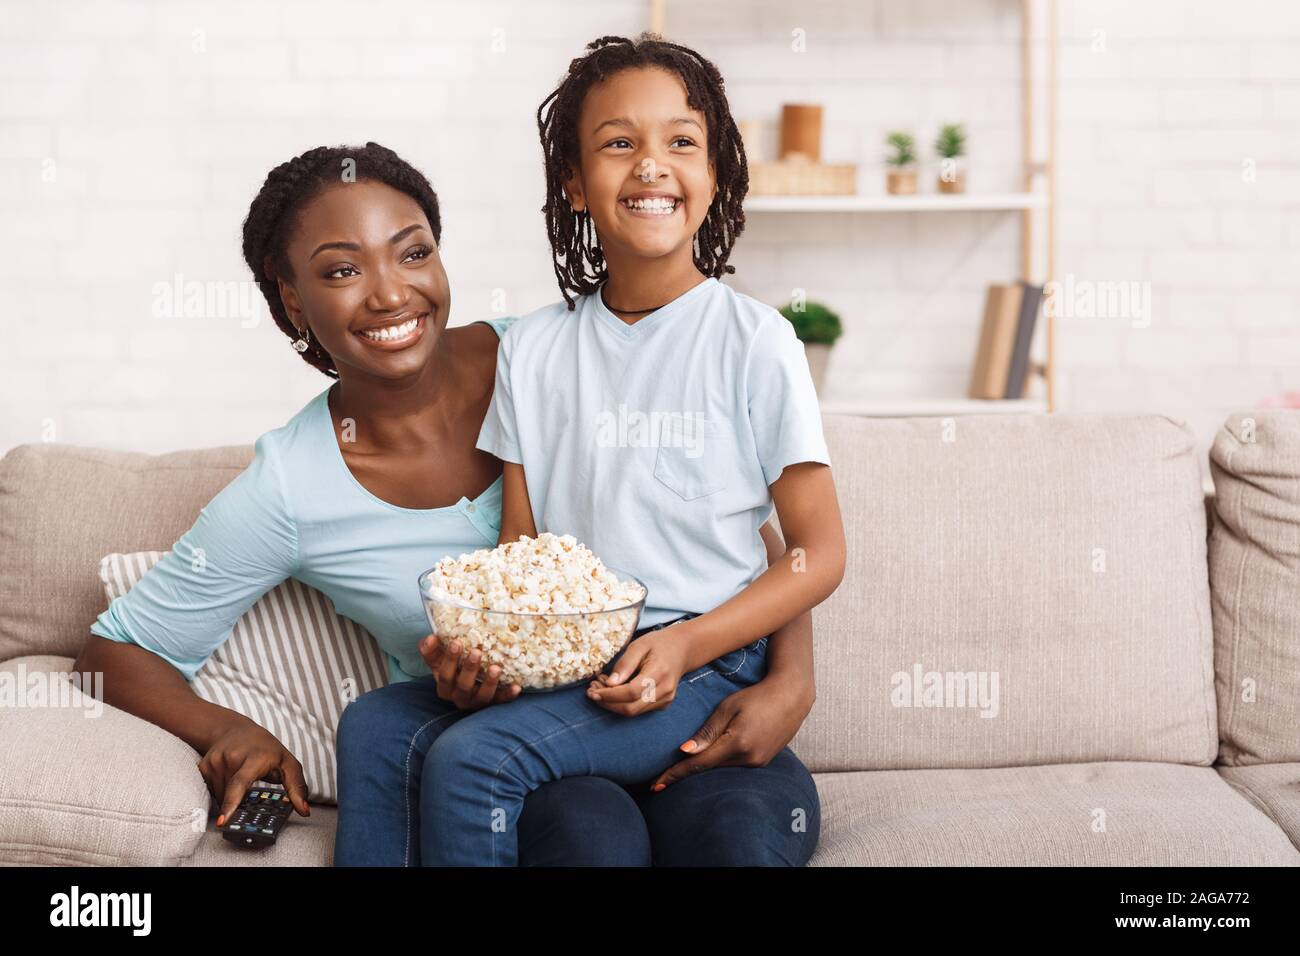 Afro family eating popcorn and watching tv together Stock Photo